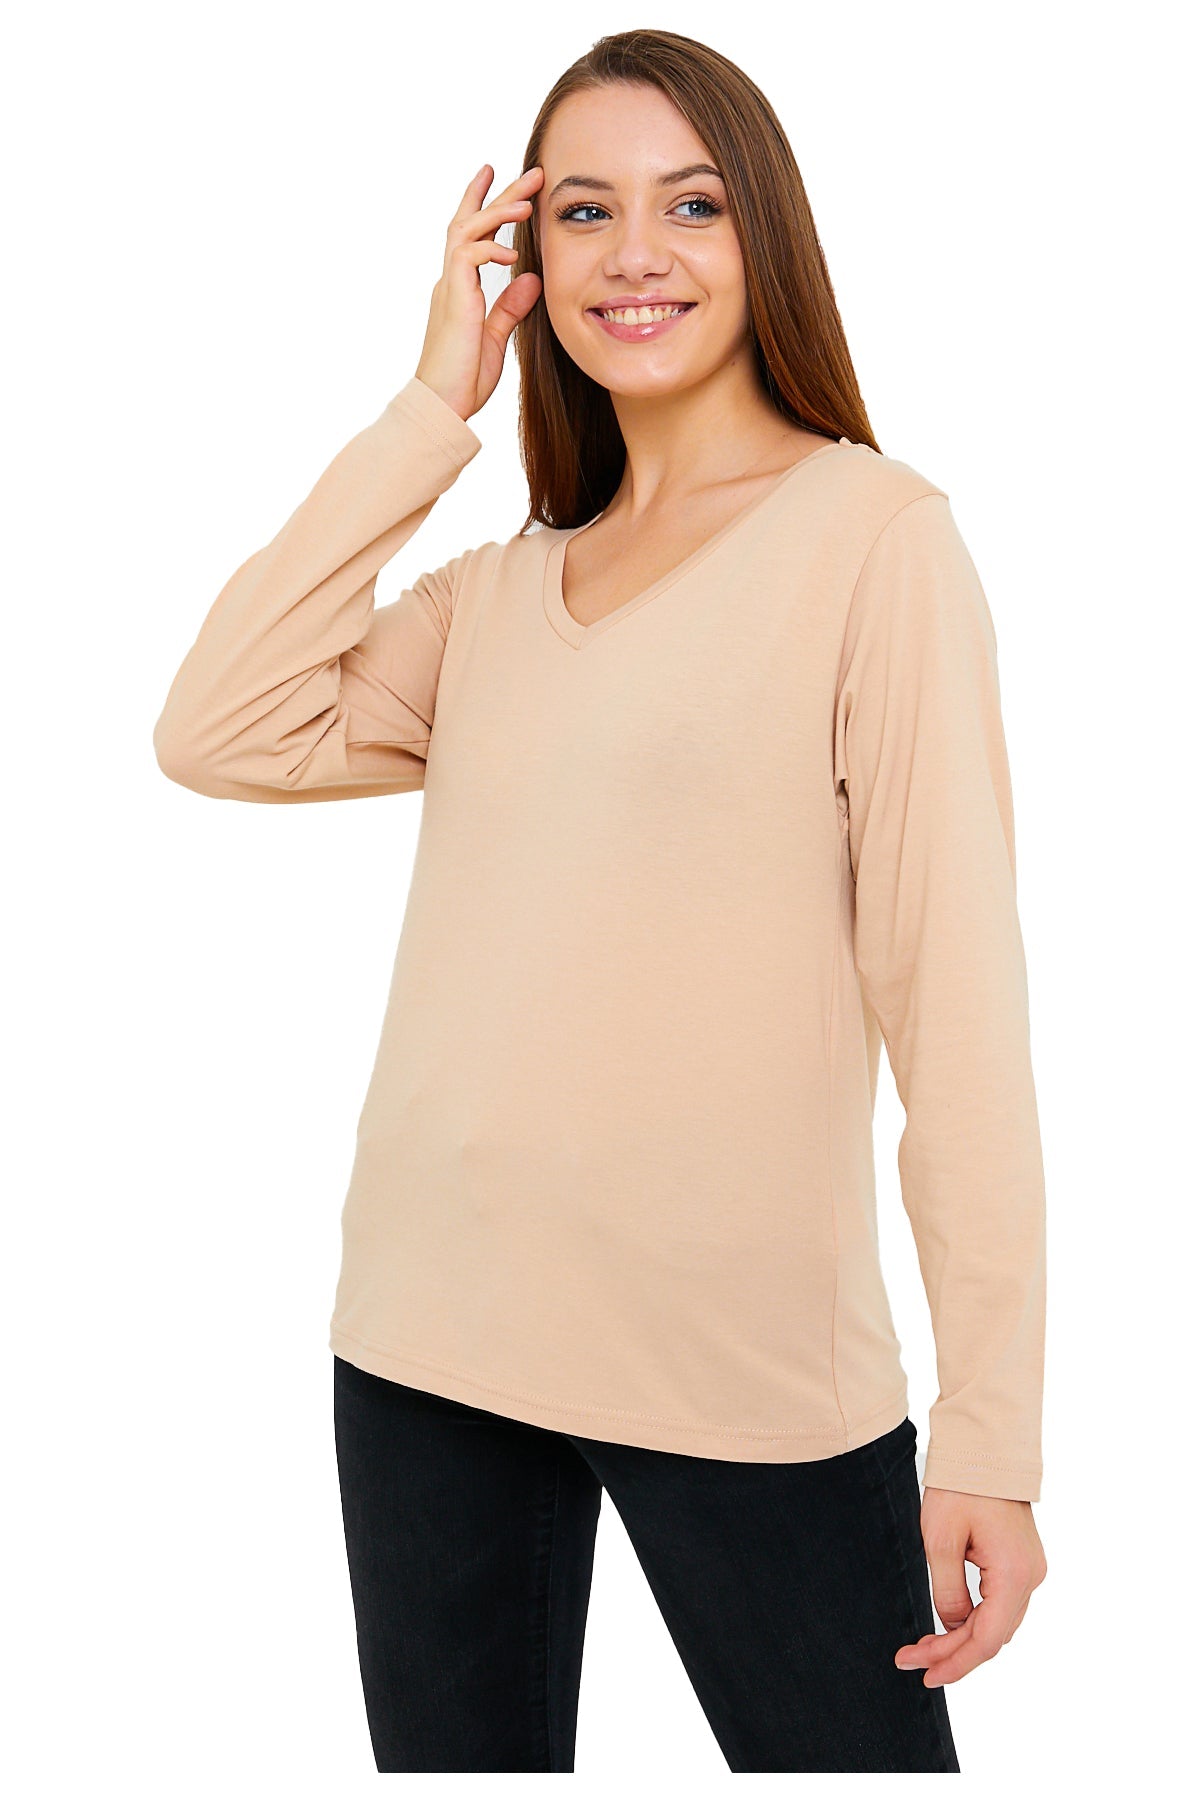 Long Sleeve V Neck T-Shirts for Women & Girls - Colorful Pima Cotton-129